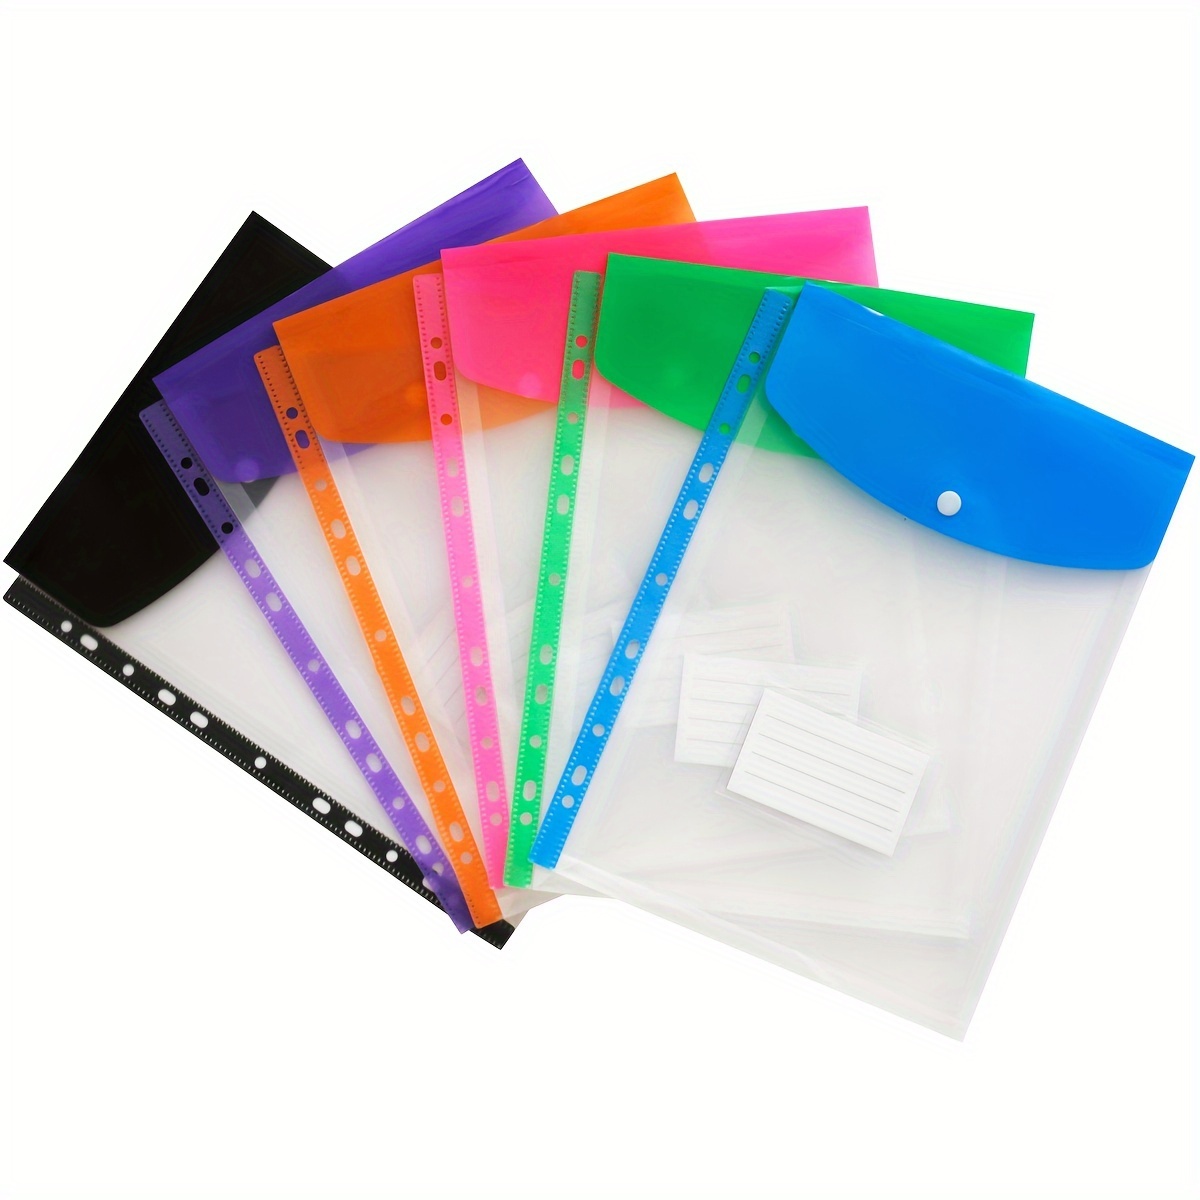 

6-pack Pp Material Binder Dividers With Snap Closure, Compatible With 2/3/4/11 Ring Binders, A4 Size With Removable Labels, Assorted Colors